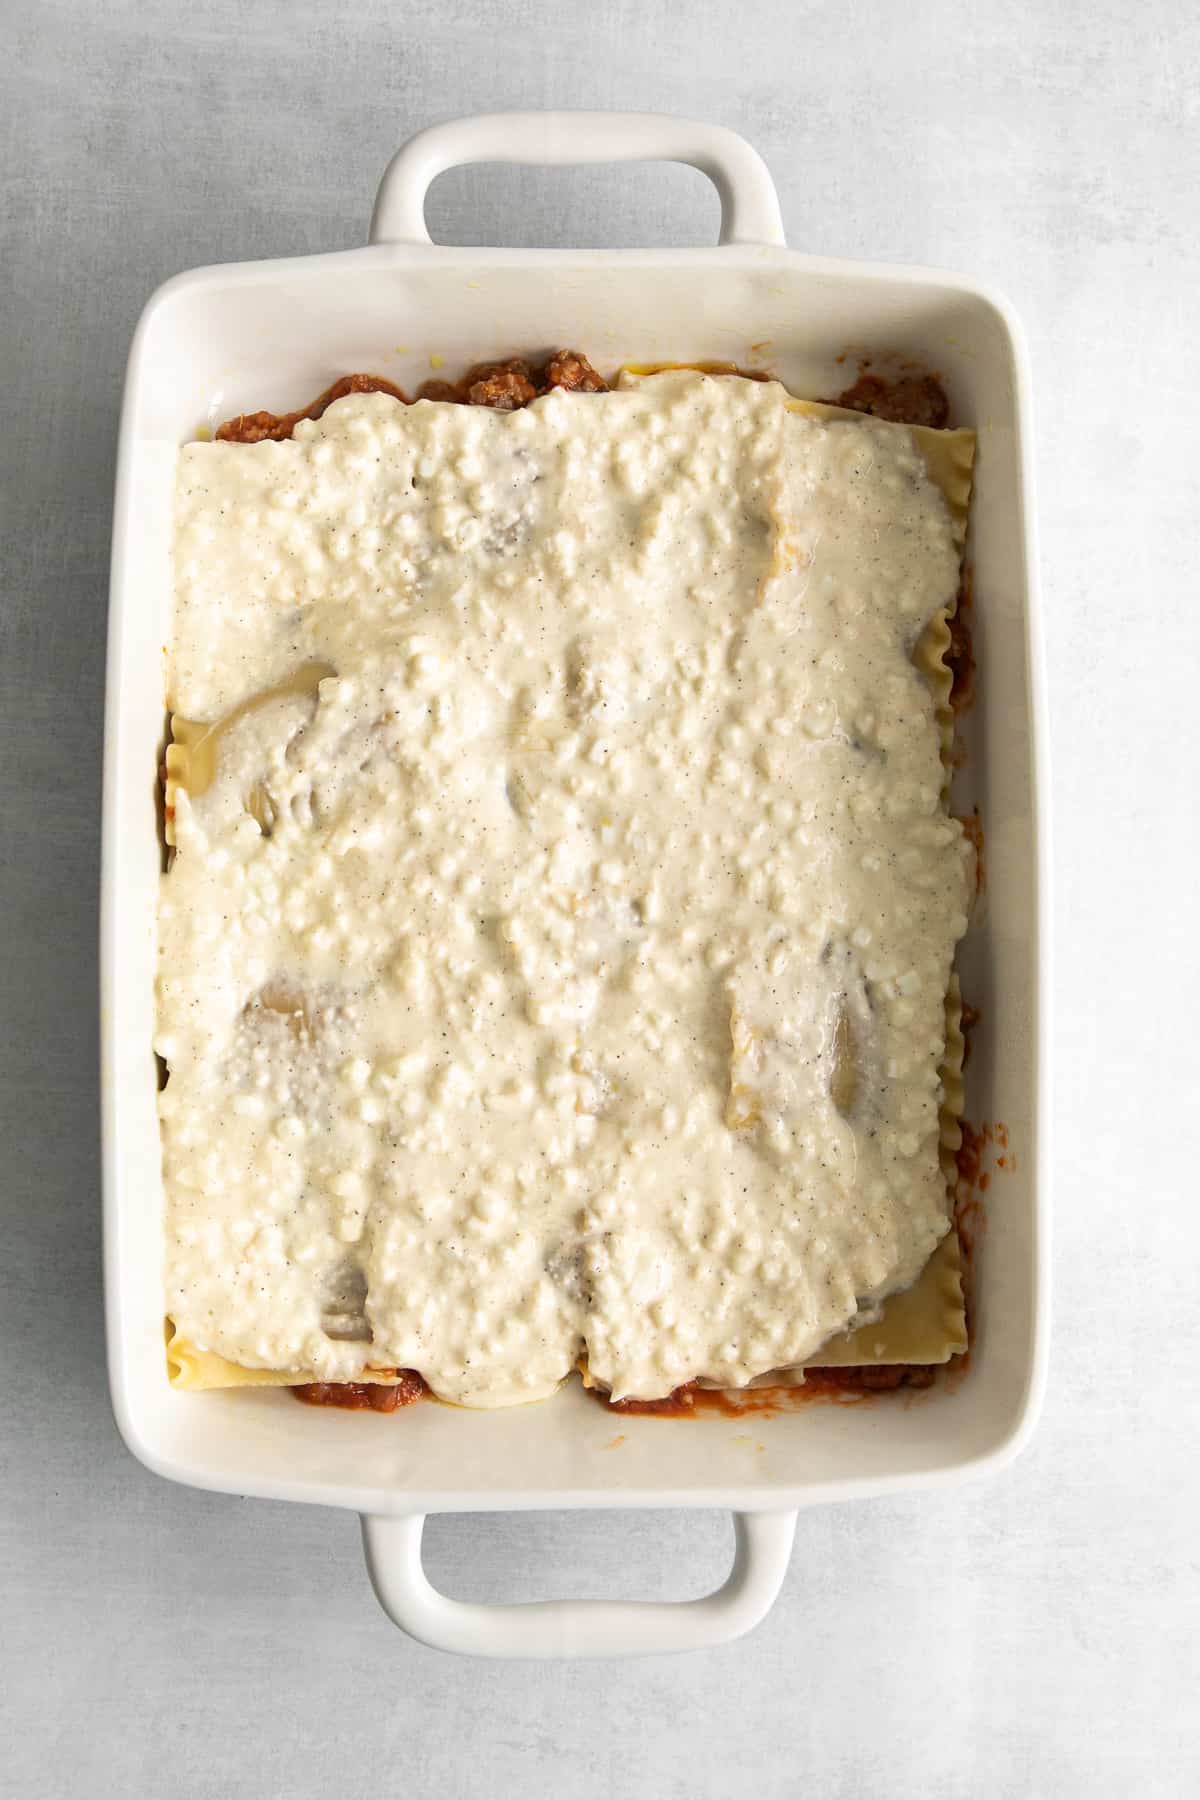 Layering lasagna noodles, sauce, and cottage cheese in a casserole dish.